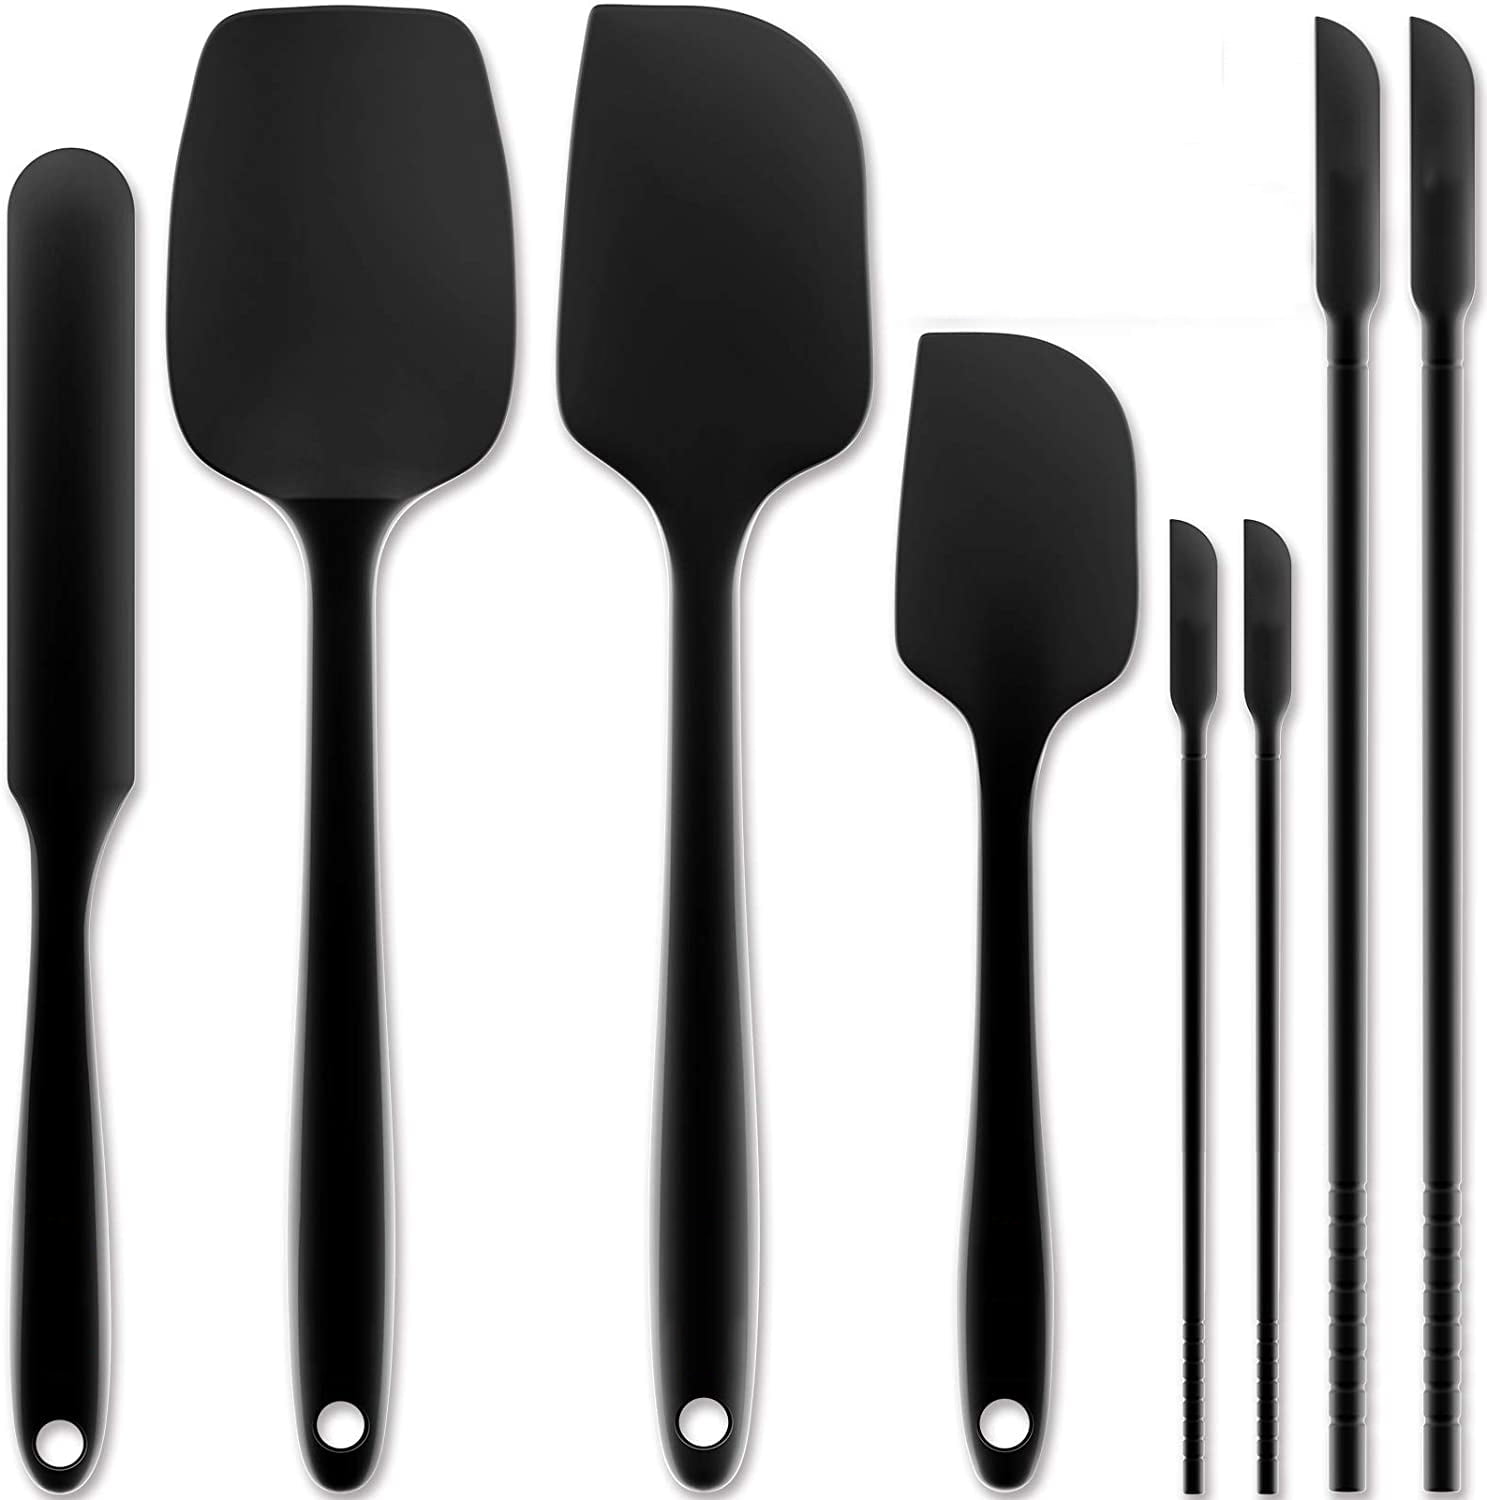 Silicone Spatula Set Kitchenware Utensils 5 Pieces Non-Stick Rubber Spatula Set Heat-Resistant Stainless Steel Core Spatulas Pastry Brushes and Egg Beater for Kitchen Cooking Mixing Baking